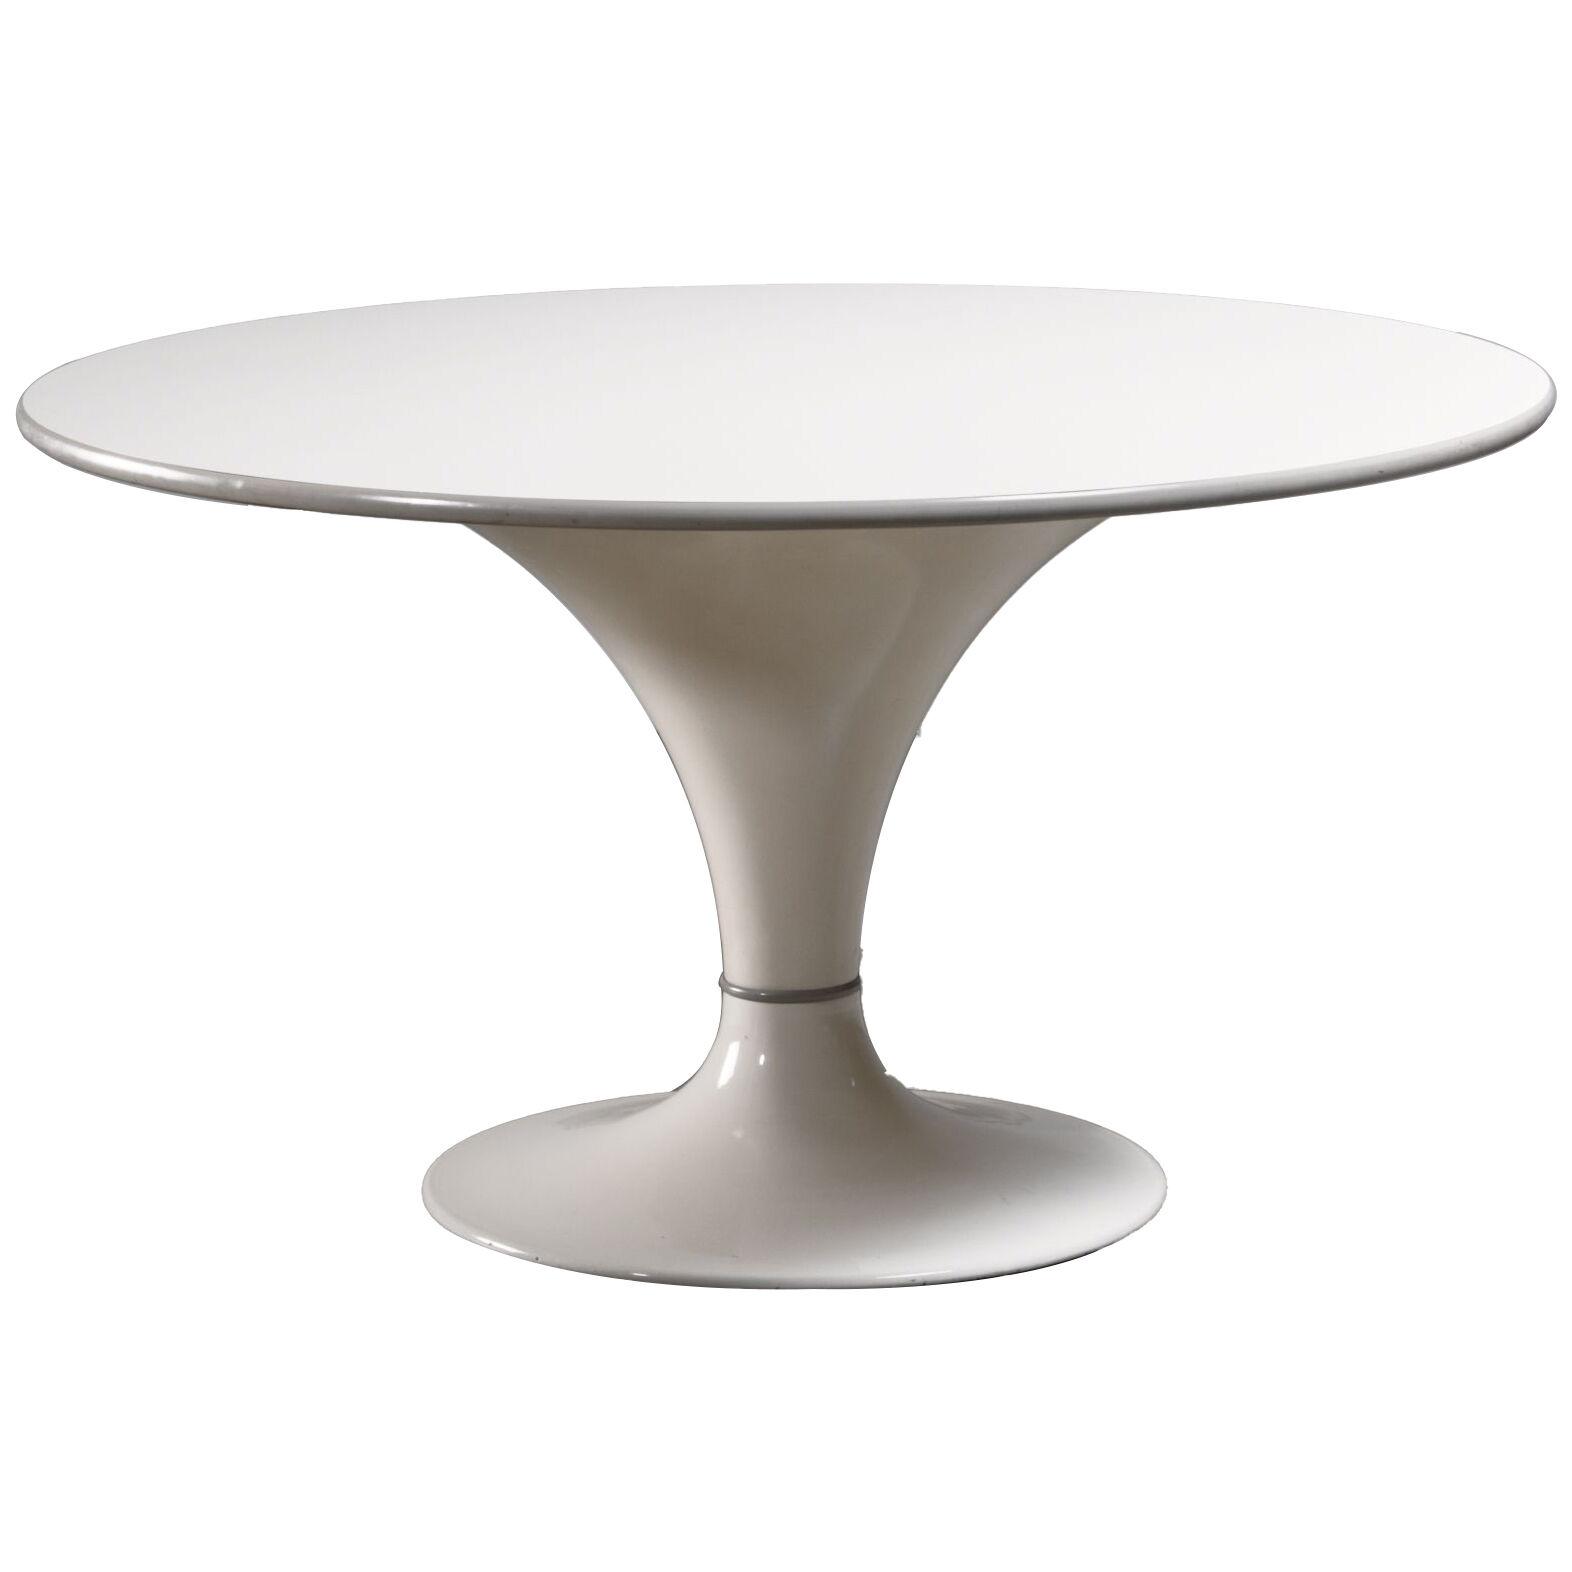 Herman Miller Round Dining Table, US, 1950s